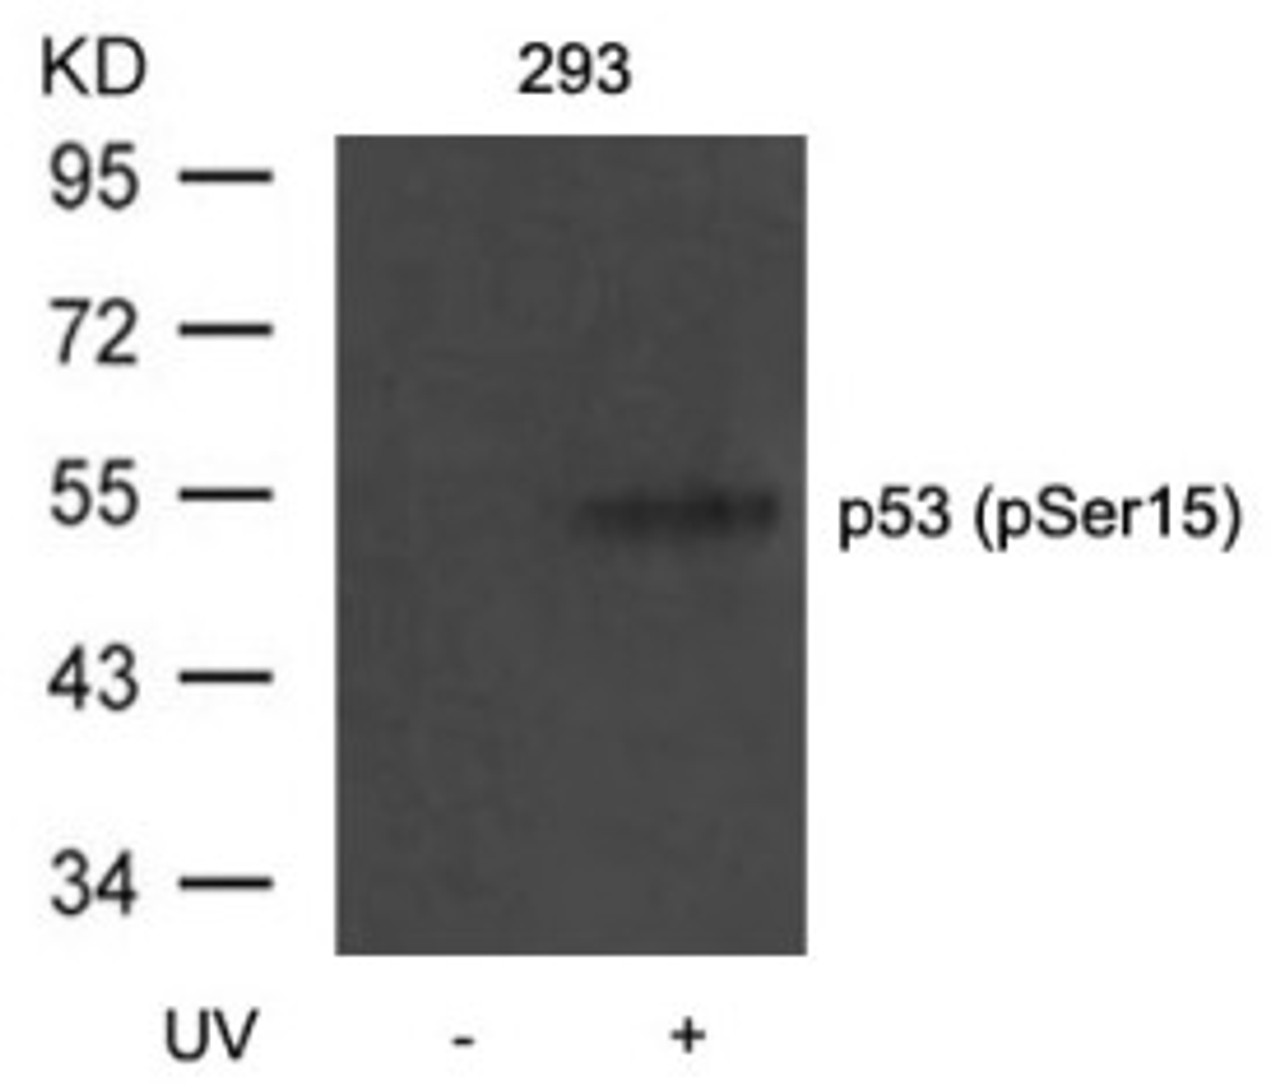 Western blot analysis of lysed extracts from 293 cells untreated or treated with UV using p53 (Phospho-Ser15) .